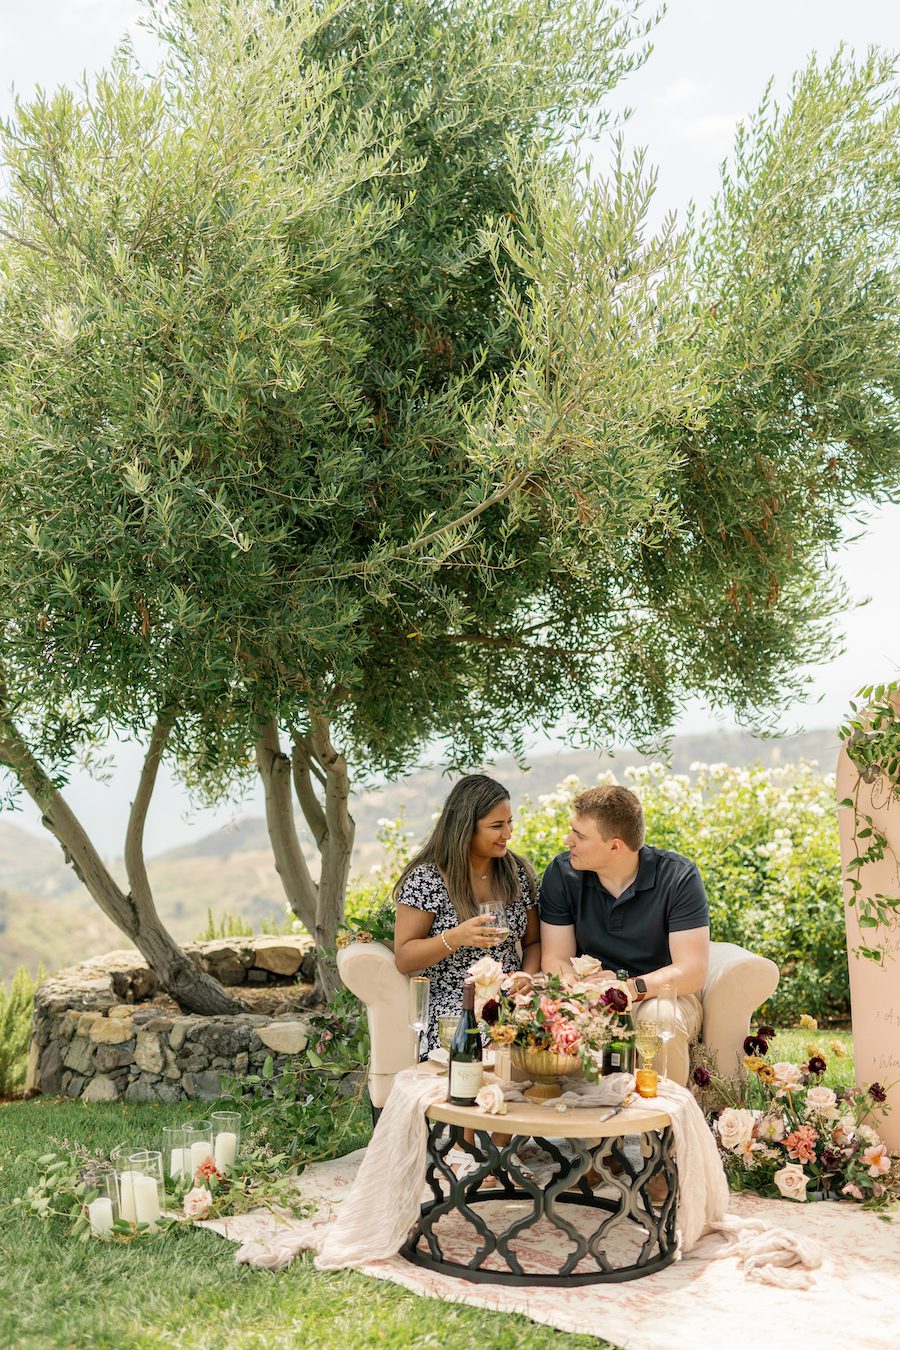 Romanic, Intimate, and Creative Malibu Proposal. With custom details and backdrops. This cozy proposal with gorgeous florals was nestled in the mountains of Malibu. 